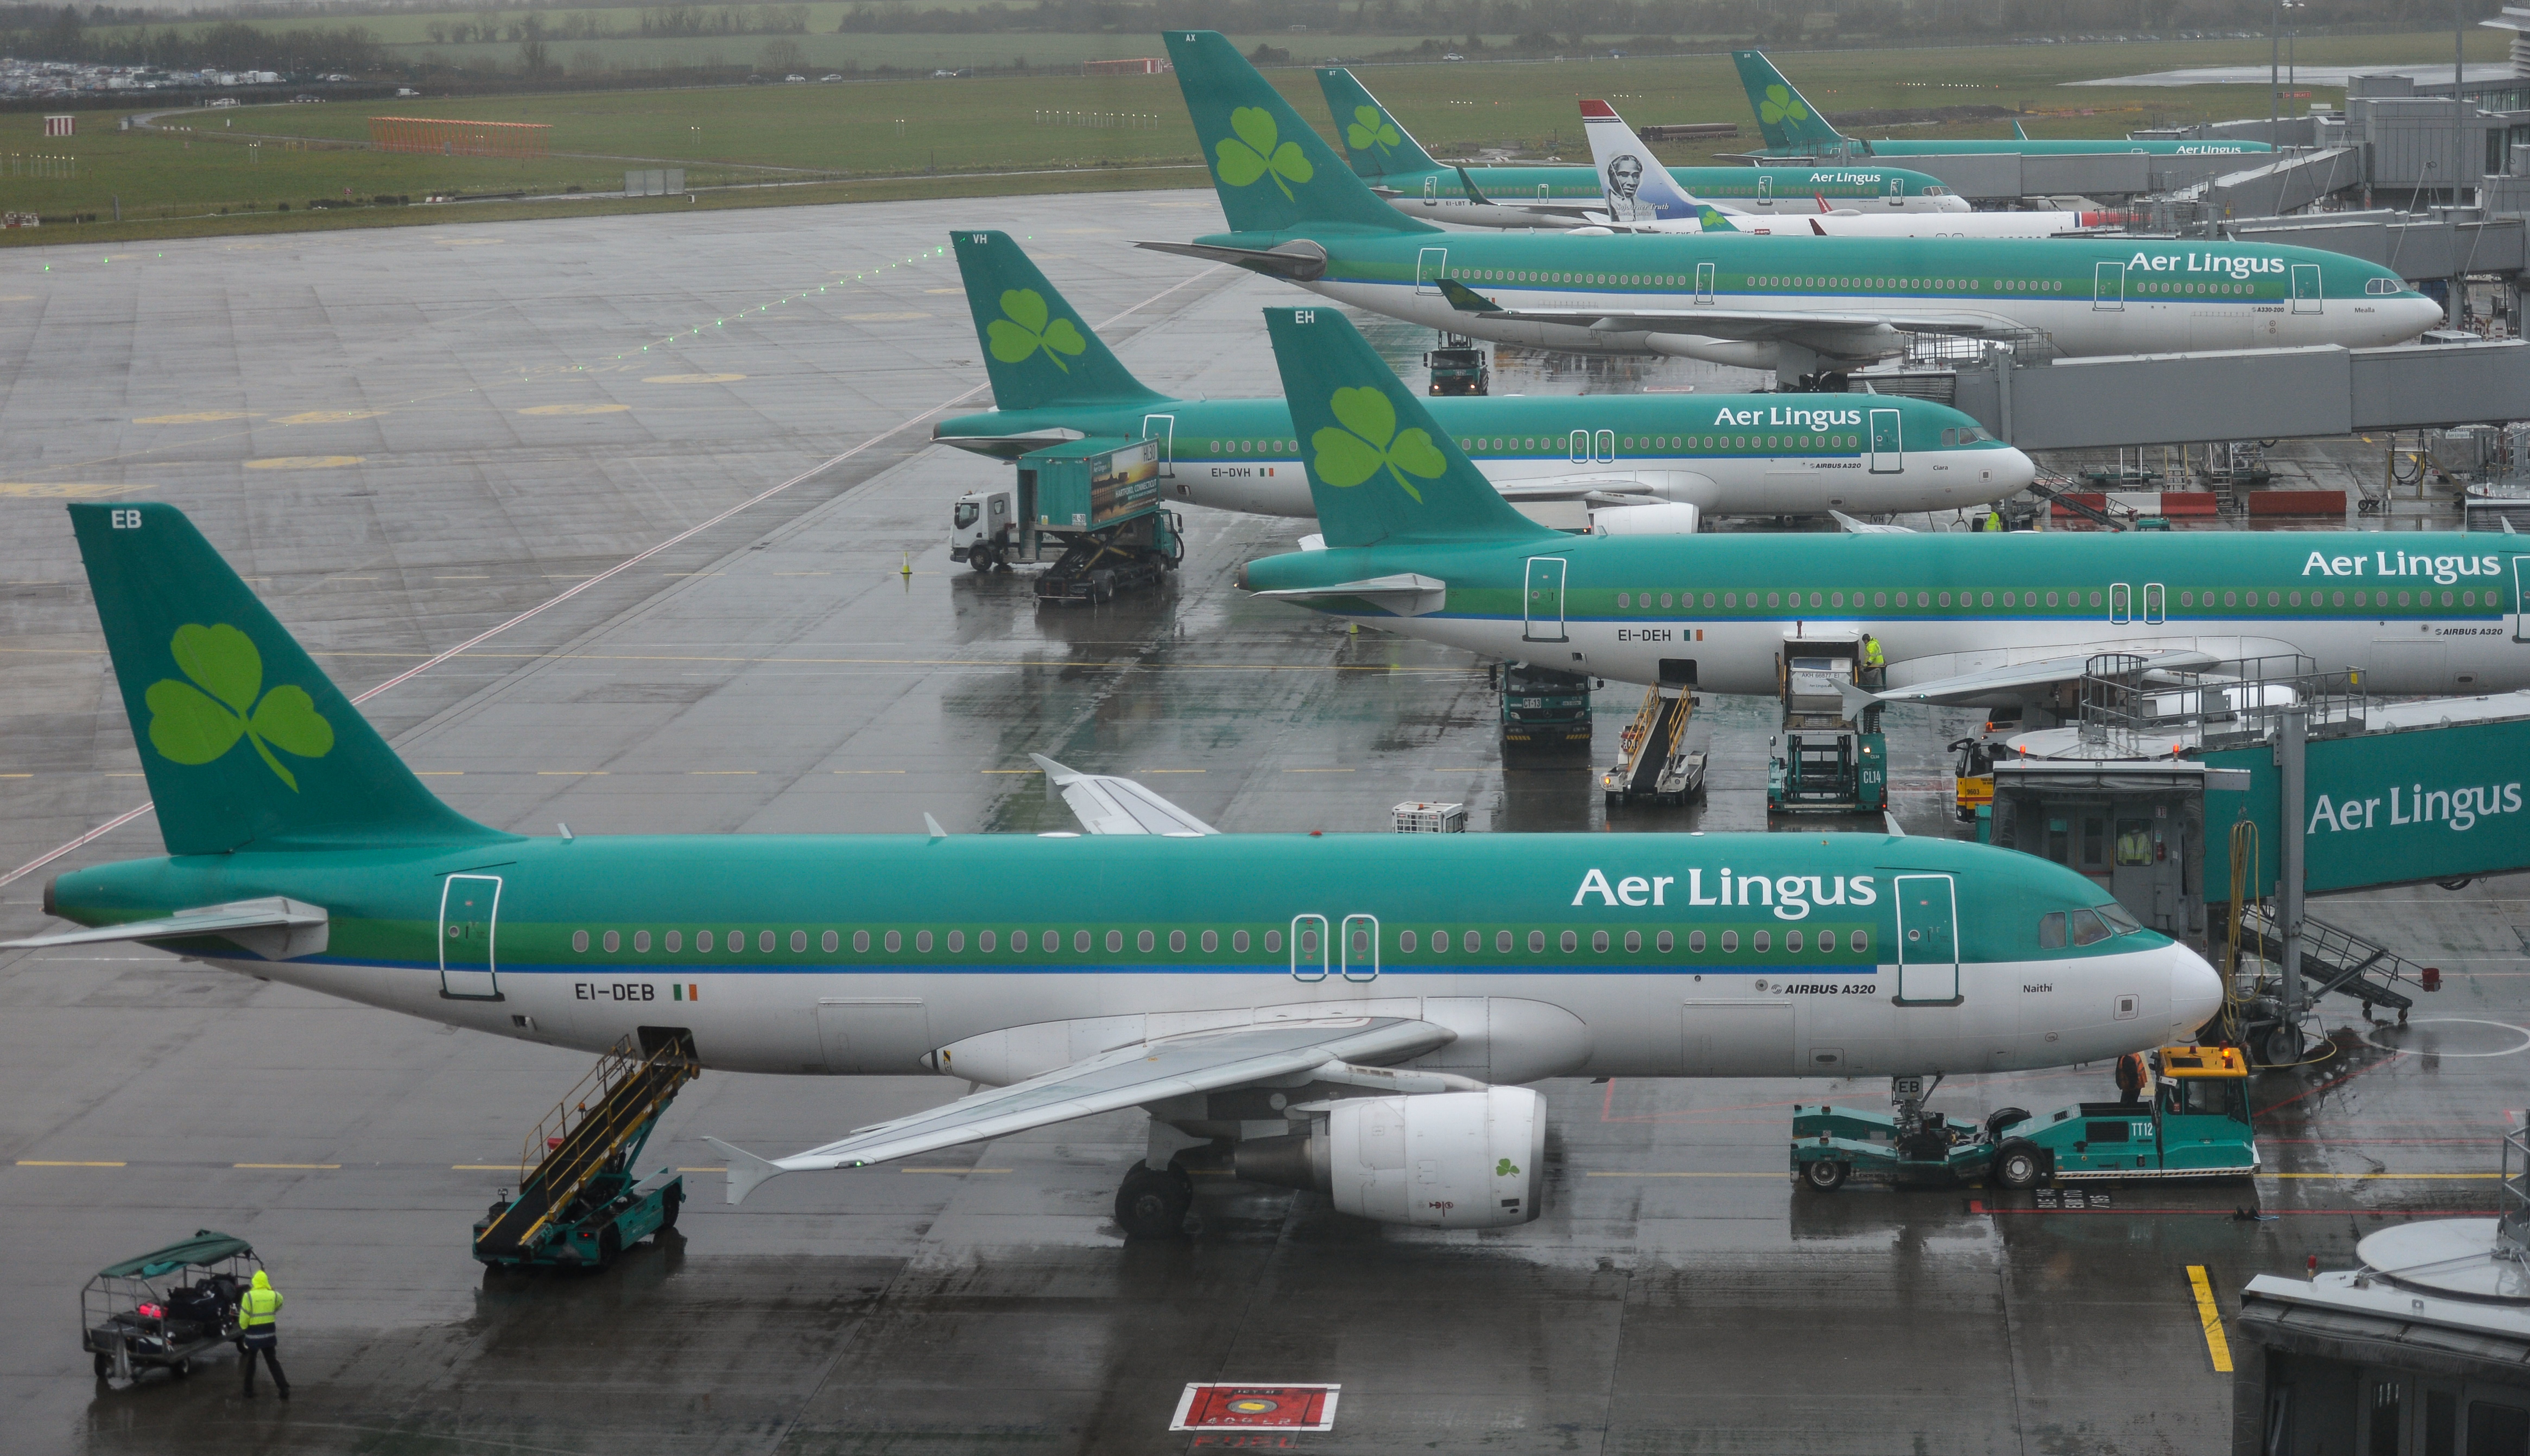 Dublin Airport Sees Only 2 Flights on Christmas Day